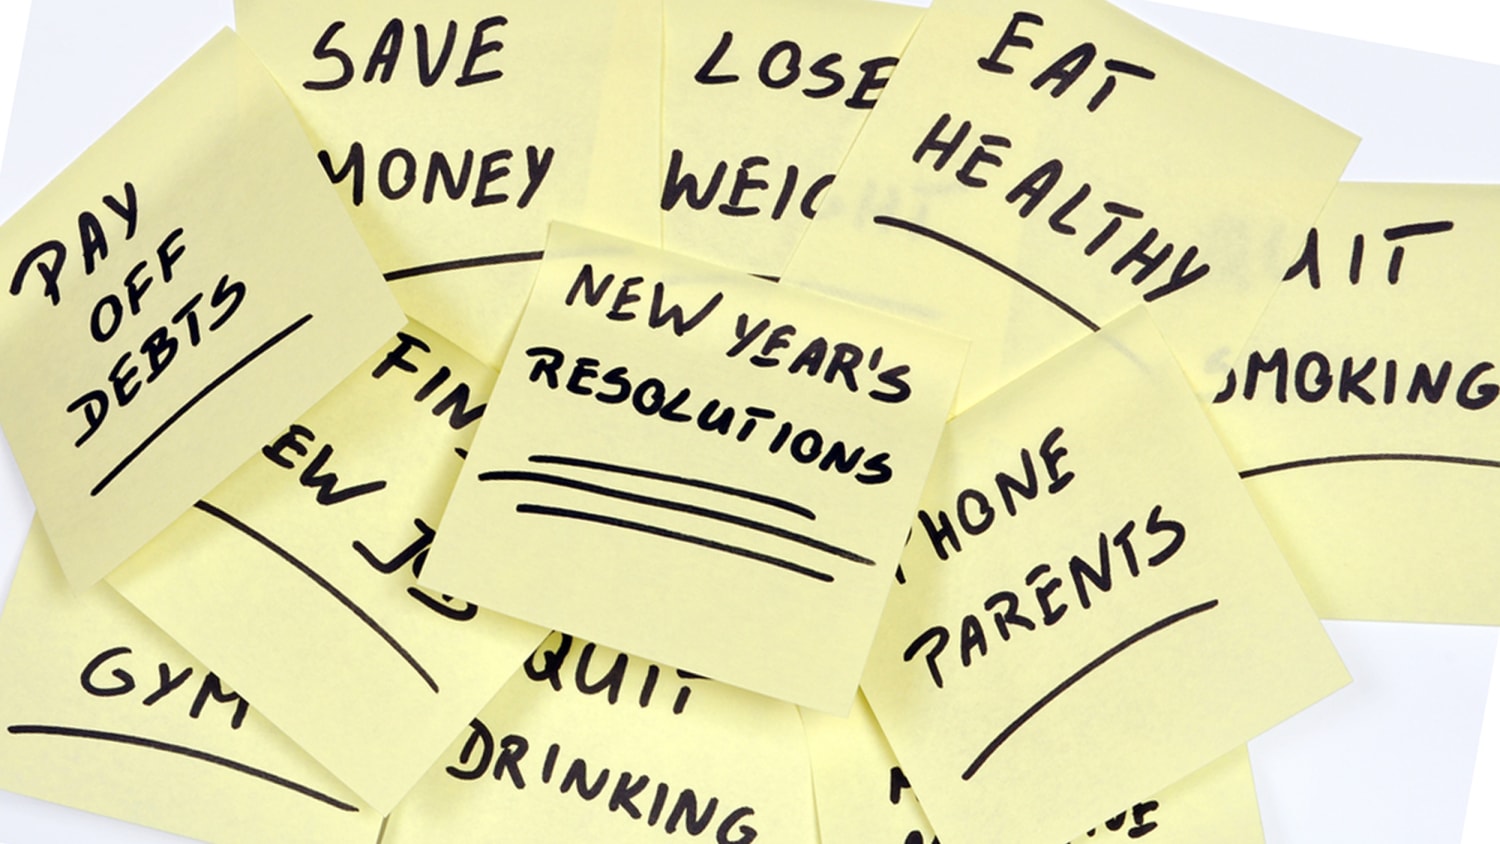 New Years Resolutions – The Money Challenge – Nimi Notes